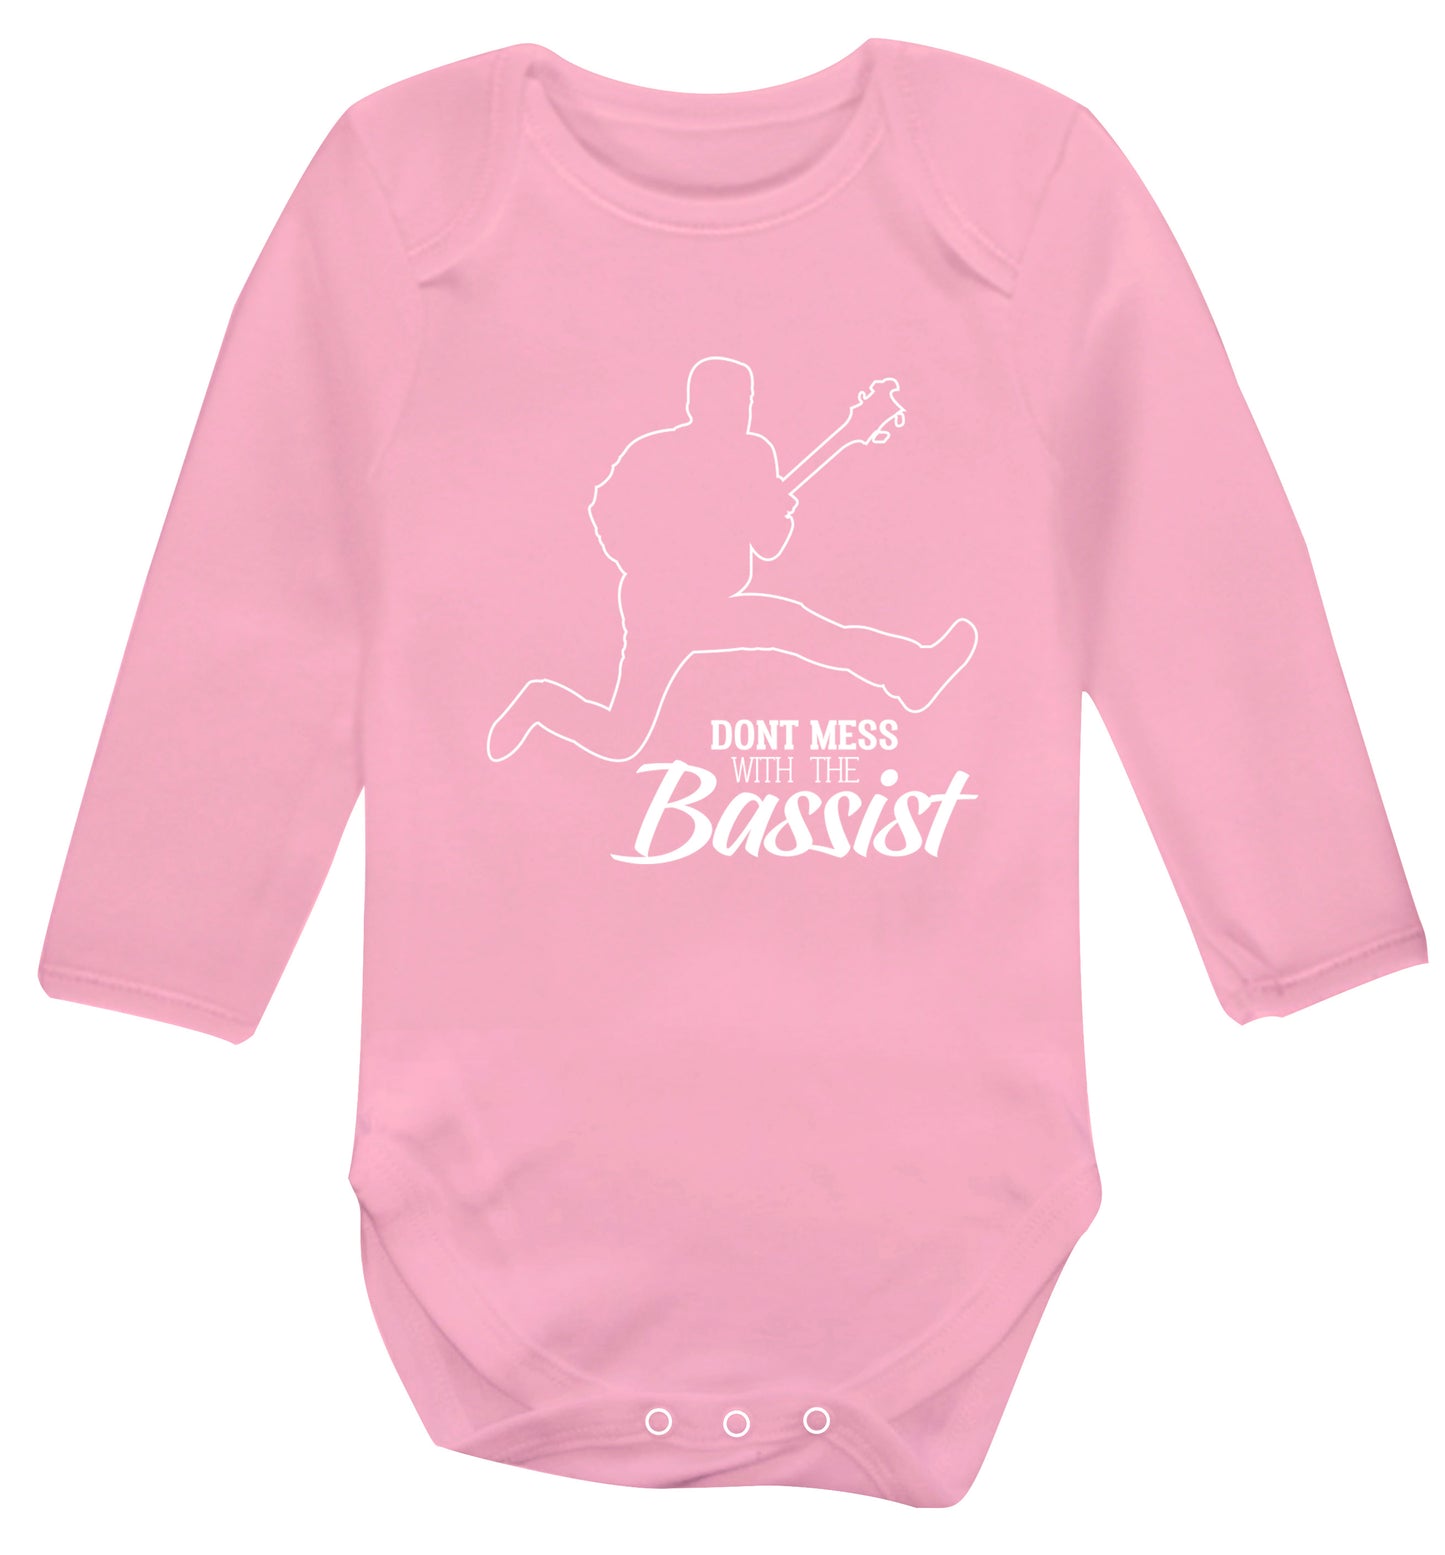 Dont mess with the bassist Baby Vest long sleeved pale pink 6-12 months